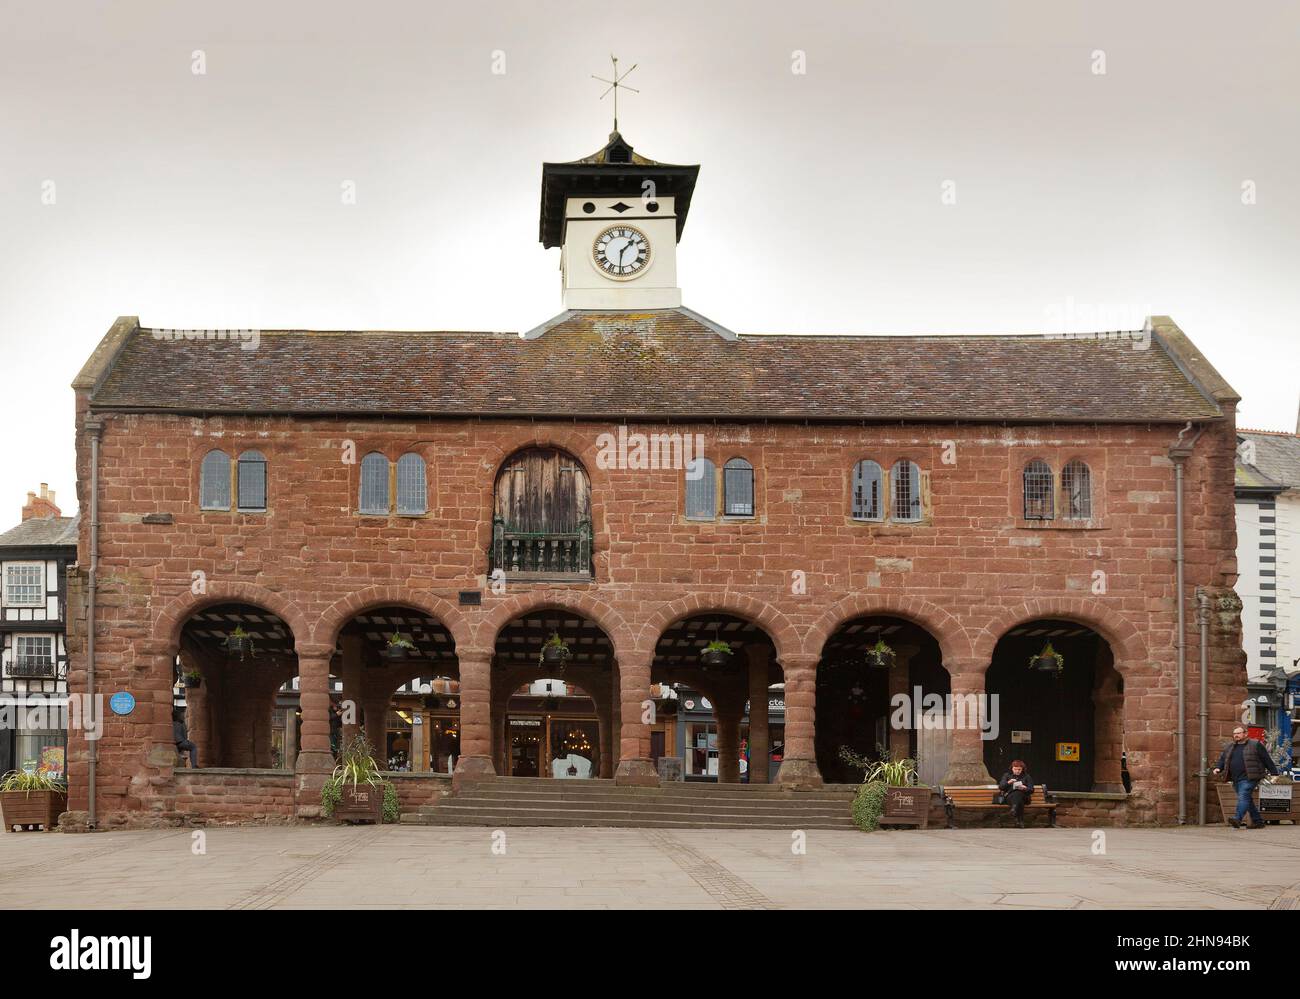 The Market House, Ross on Wye, Herefordshire Stockfoto